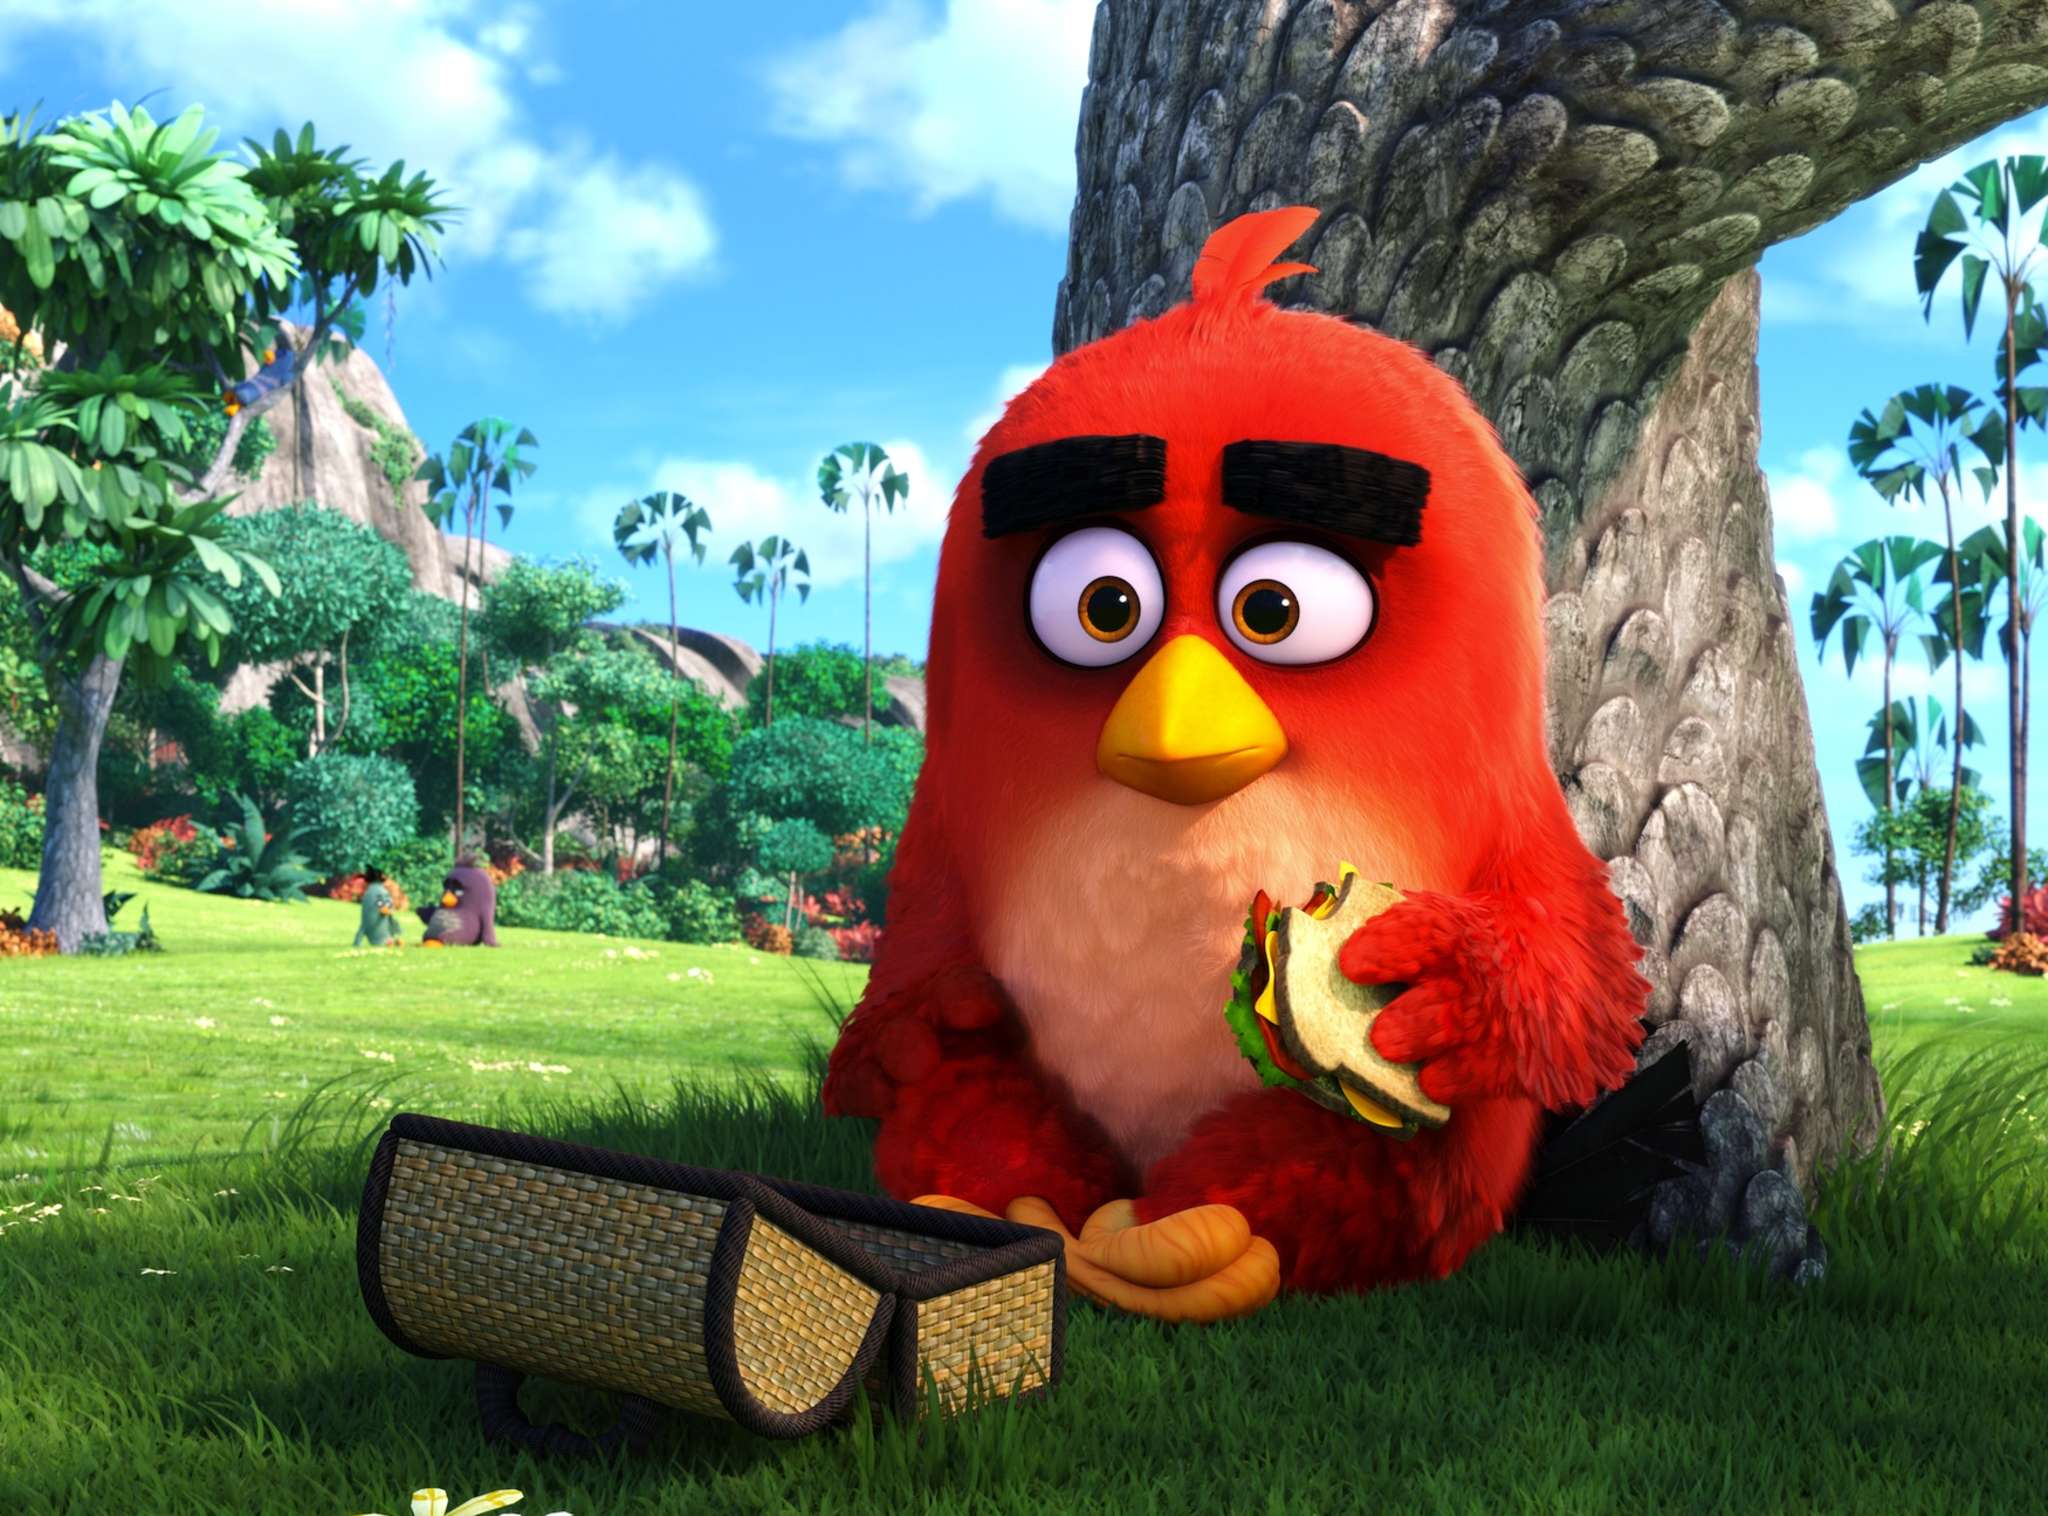 The Angry Birds Movie': Weirdly dark for a kids' flick